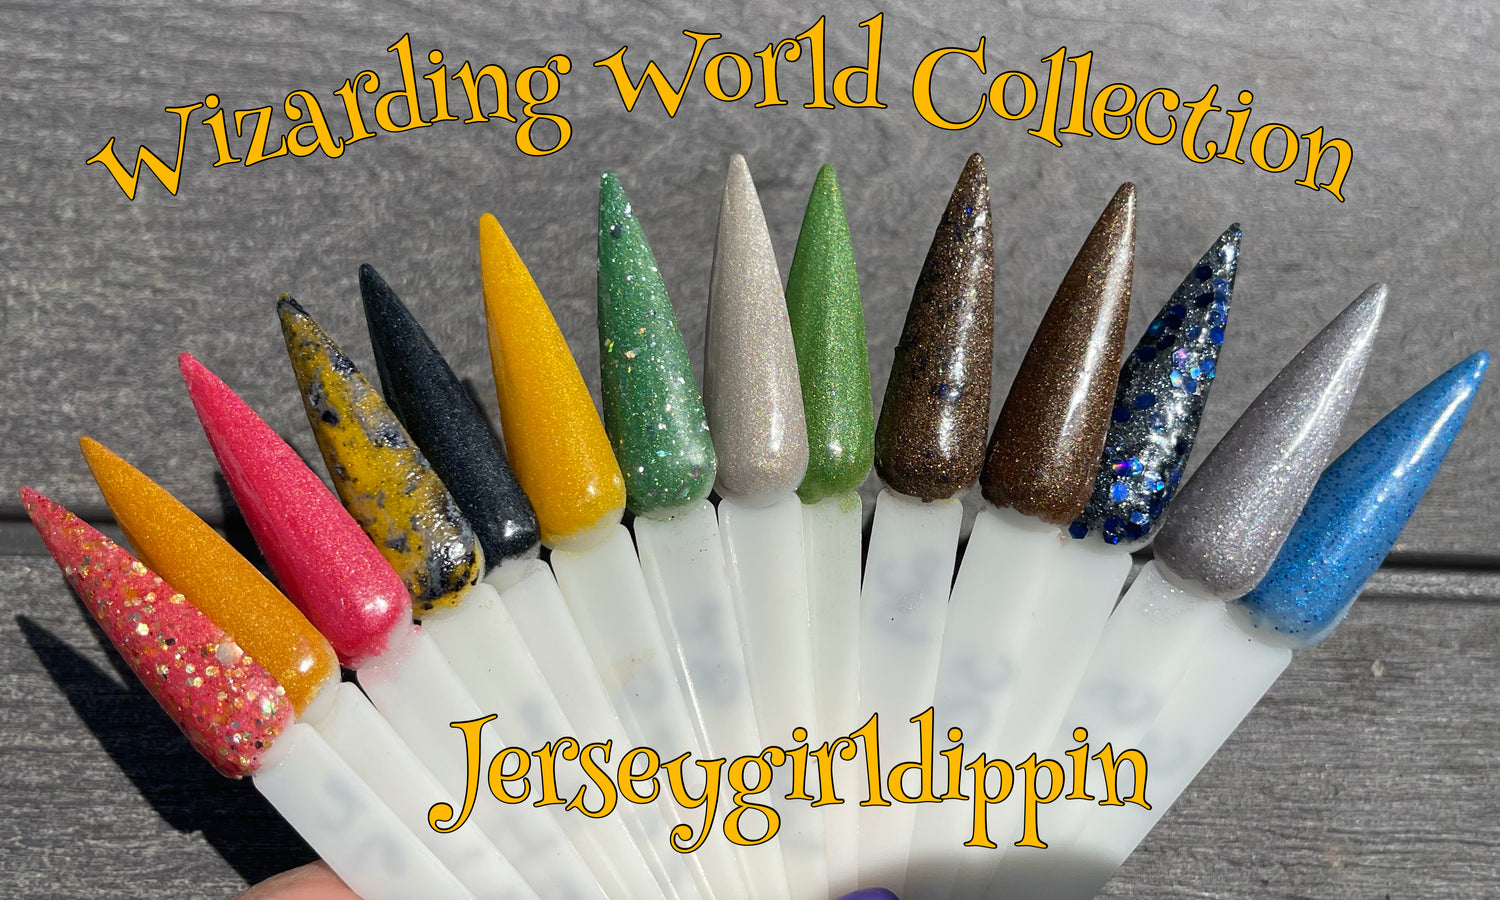 The Wizarding World Collection